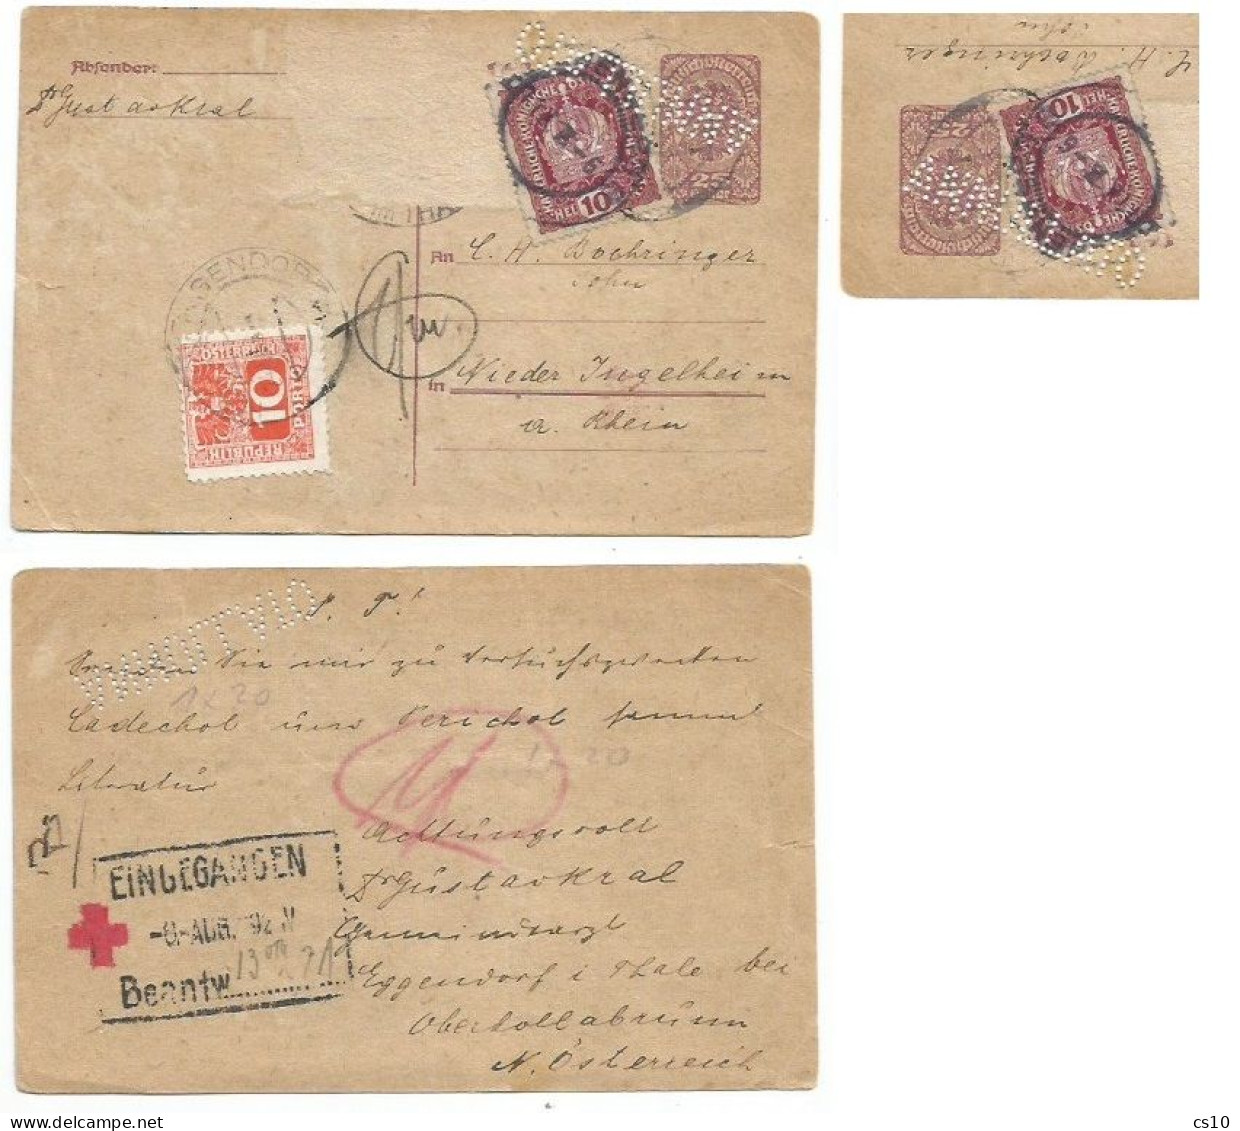 Austria PSC H.25 + H.10 Sent 1oct1918 (1 Stamp Missed) Taxed P.Due H.10 With Perforation "ANNULLATO" .....???? - Covers & Documents